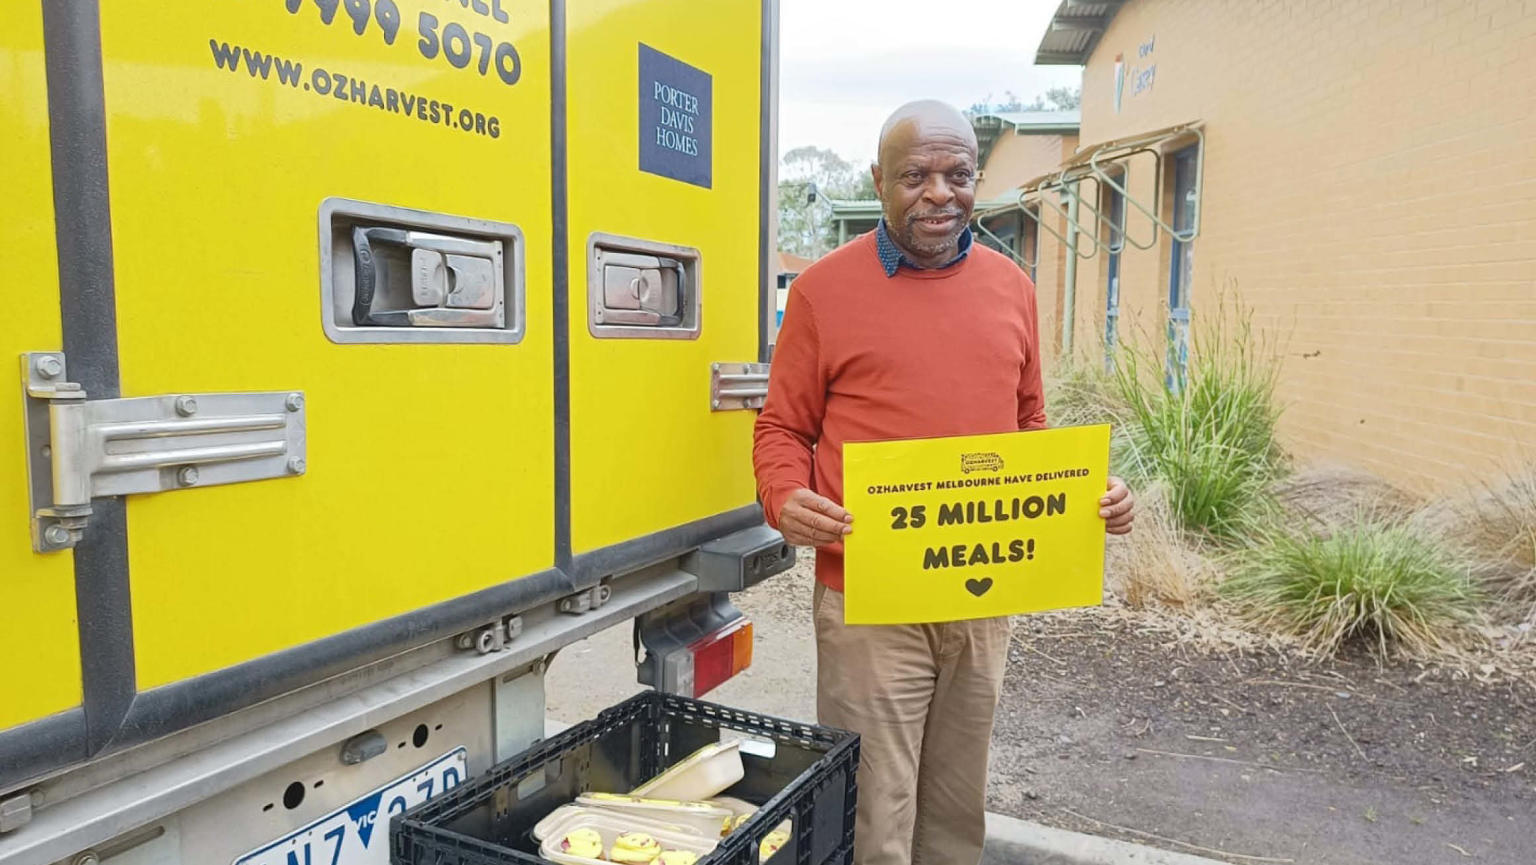 An image showing a man standing in front of a yellow OzHarvest van with a crate of food, holding a sign that says, 'OzHarvest Melbourne have delivered 25 million meals.' 